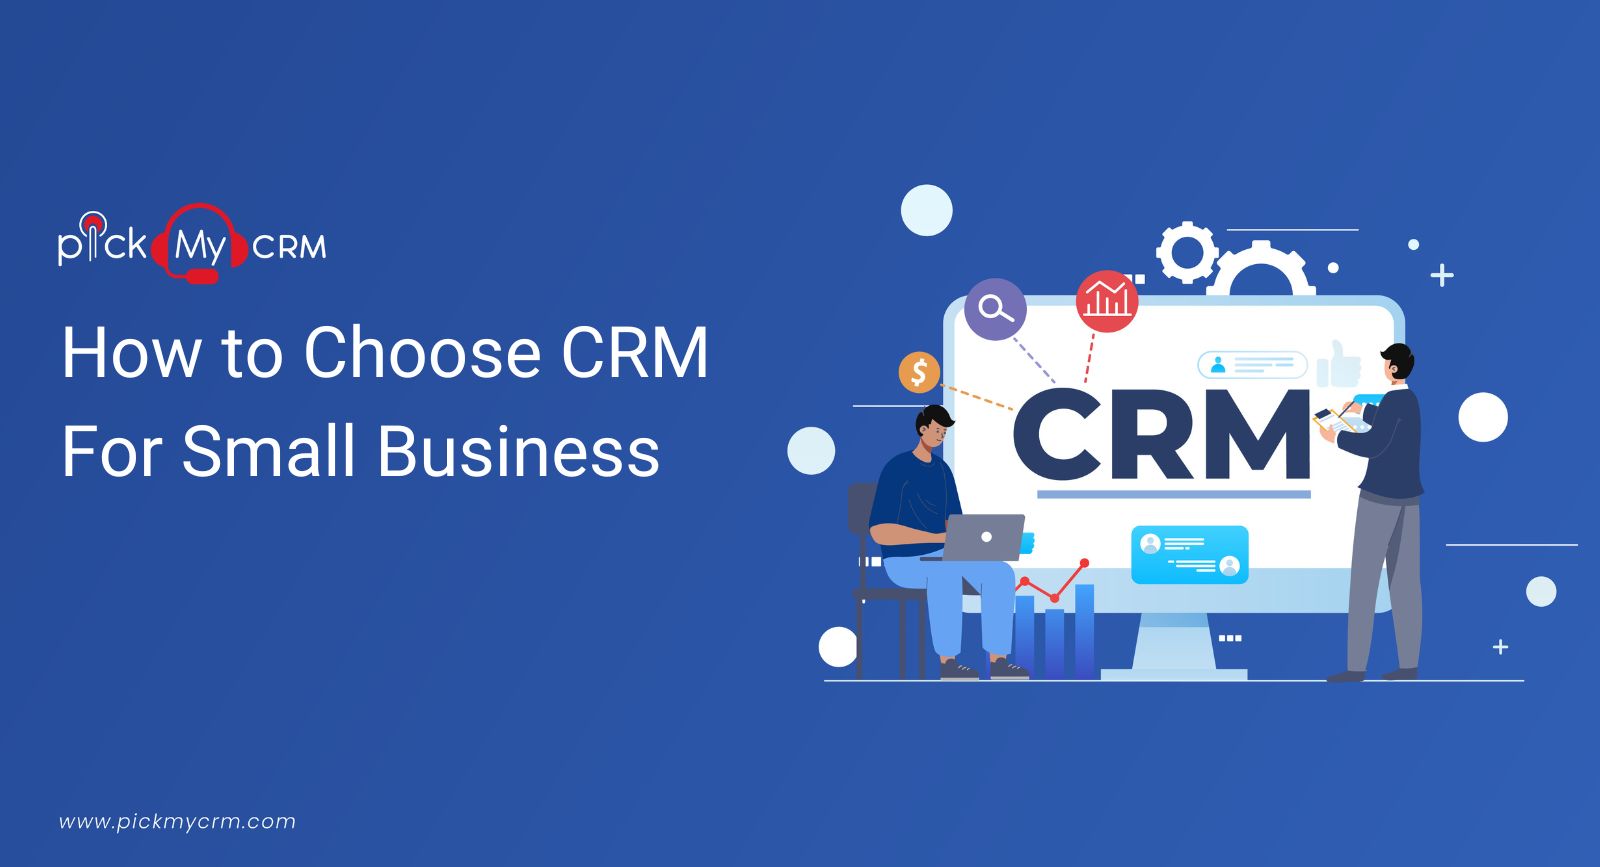 How to choose a CRM for small business